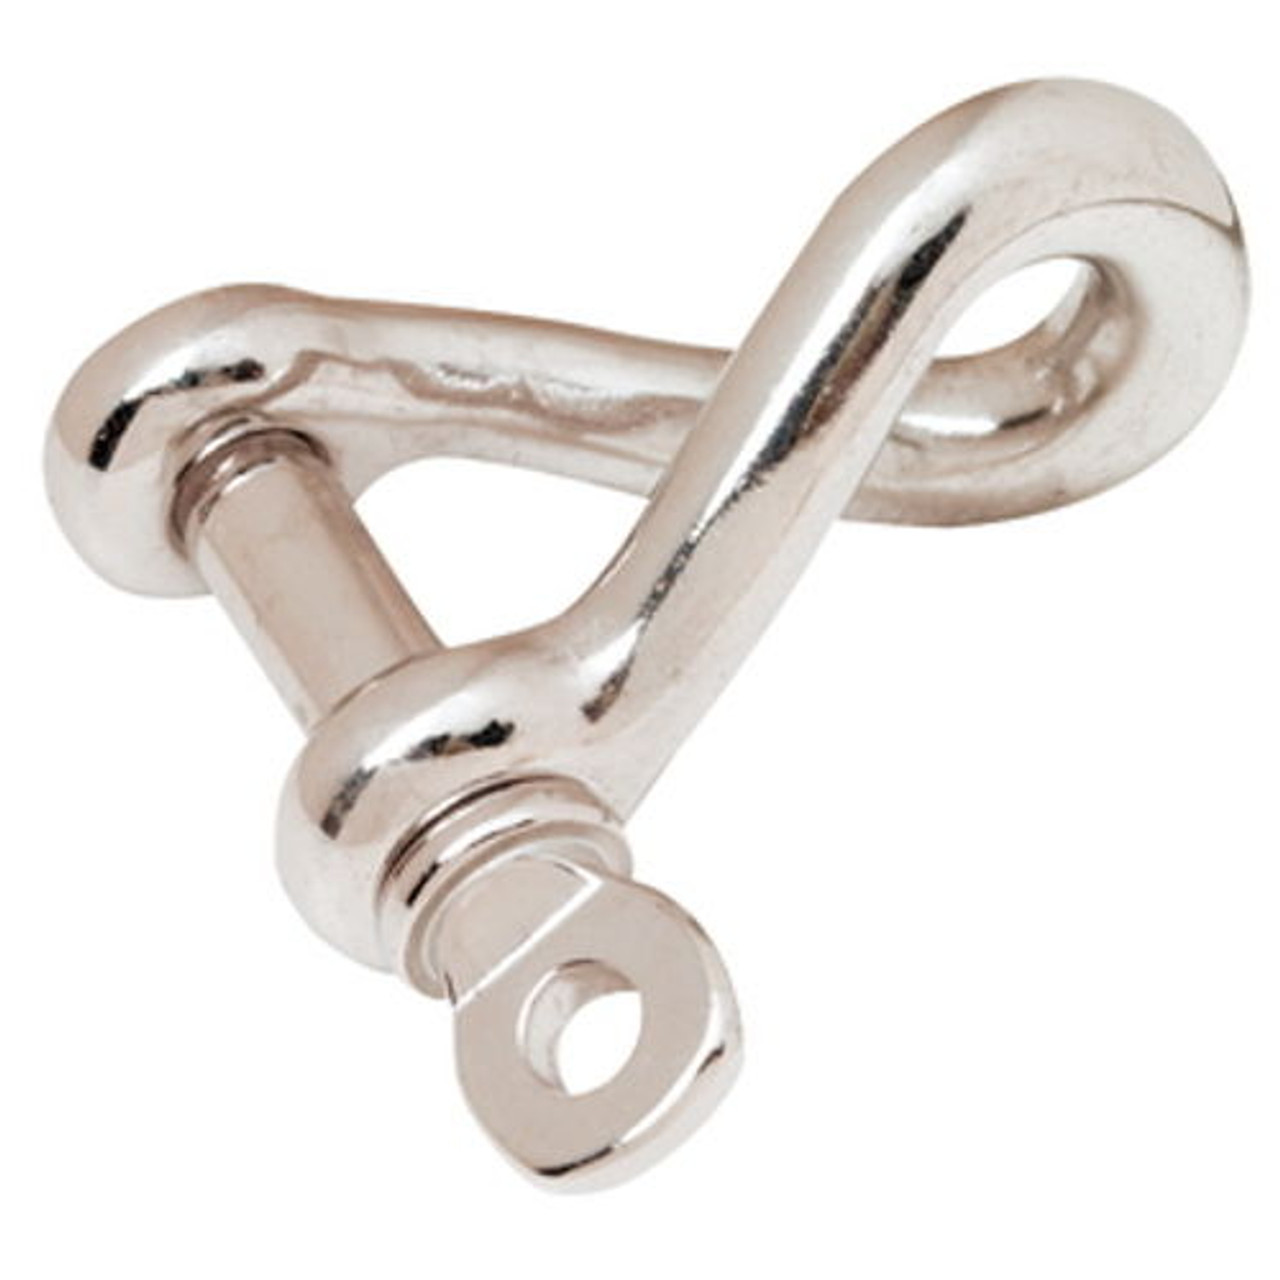 1/4 Inch Stainless Steel Twisted Anchor Shackle - 3,900 lbs Breaking Strength